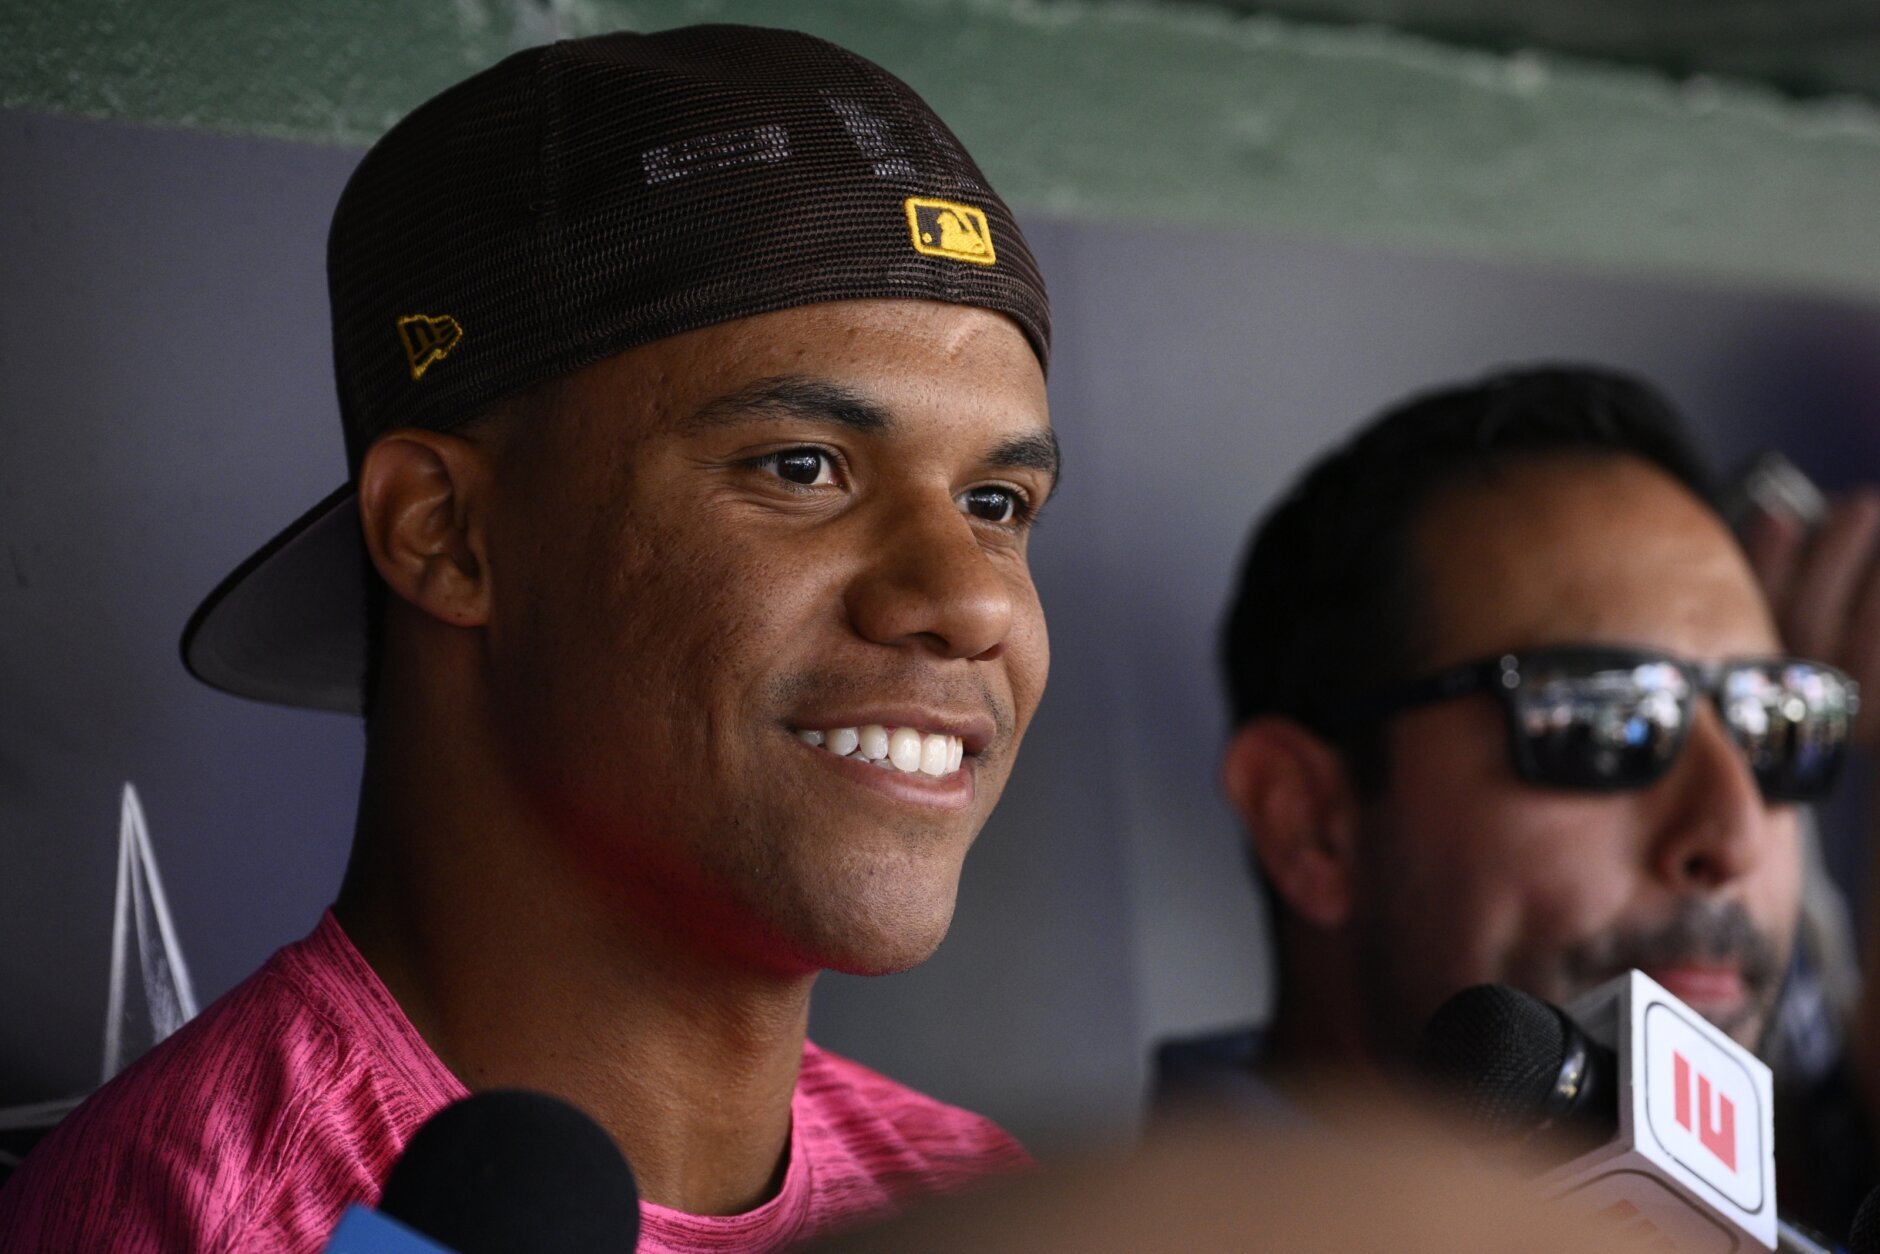 Juan Soto back in Washington, grateful for time with Nats - WTOP News